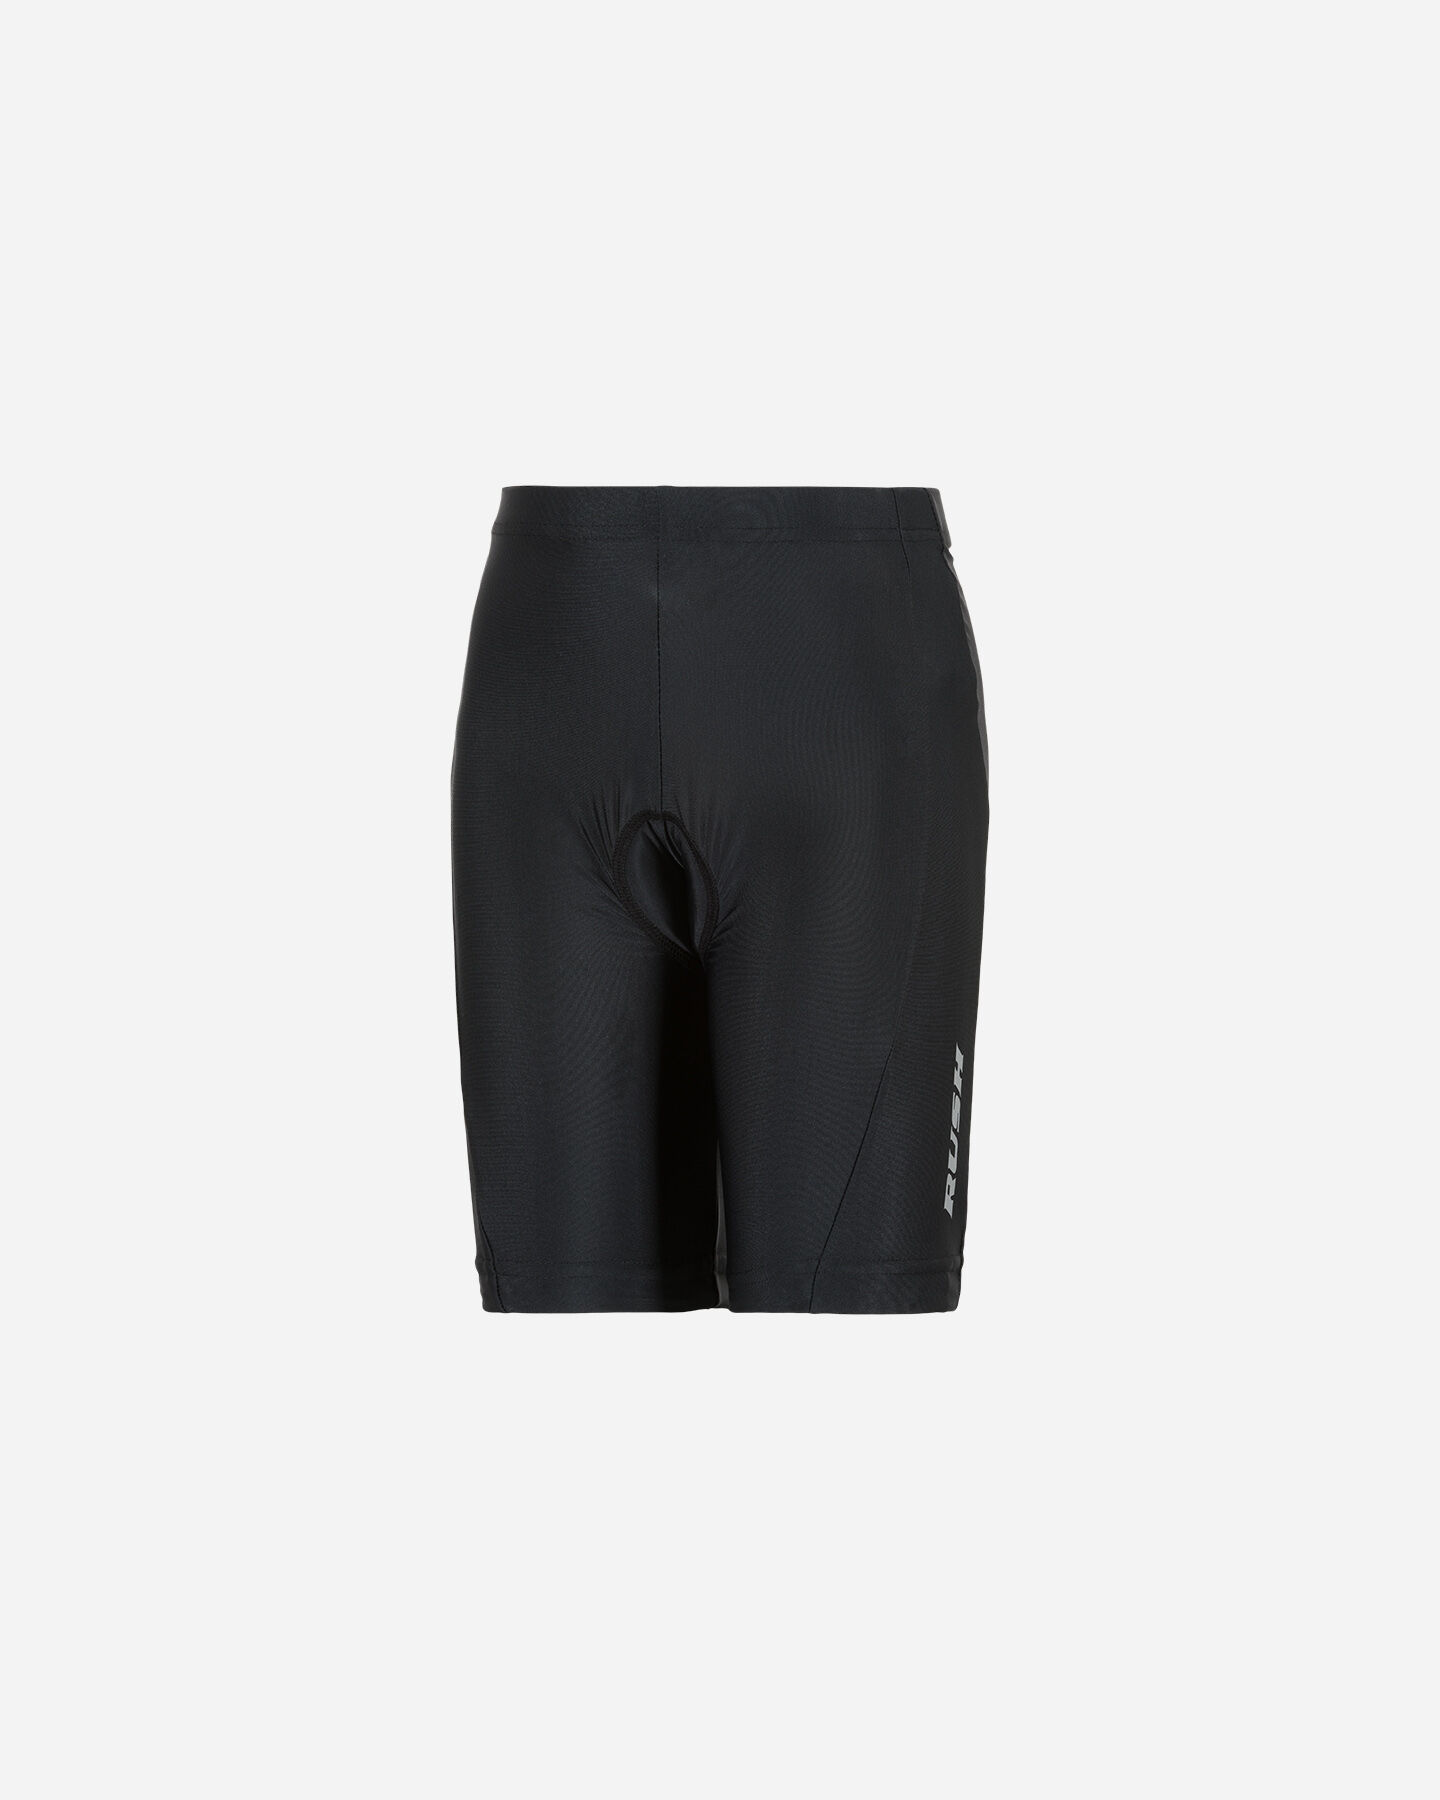  Short ciclismo RUSH BASIC M S4075209|050|6A scatto 0